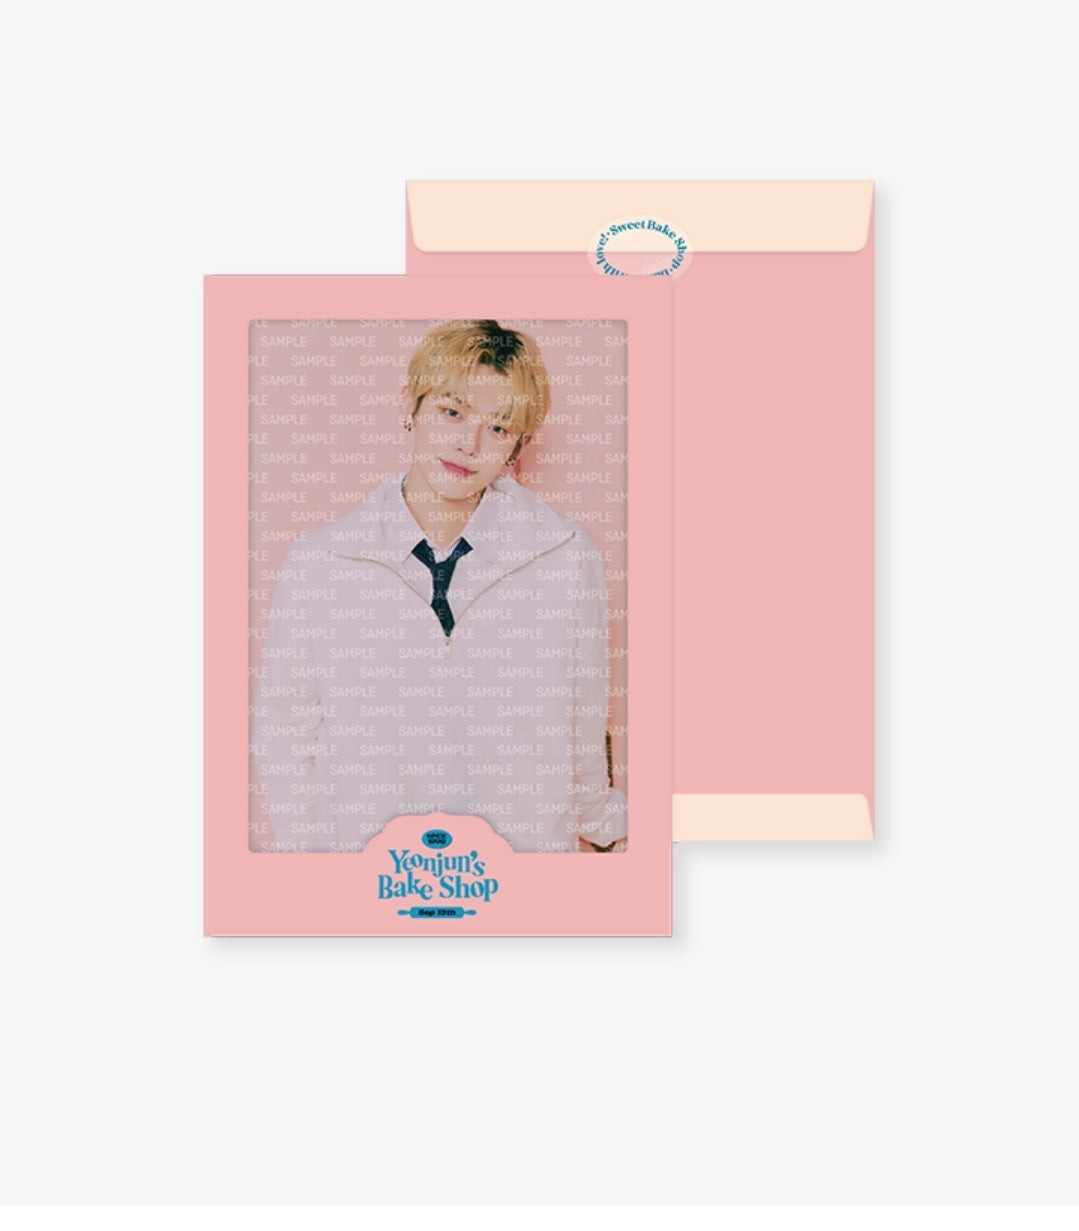 PRE ORDER TXT - BIRTHDAY OFFICIAL MD YEONJUN'S BAKE SHOP - COKODIVE